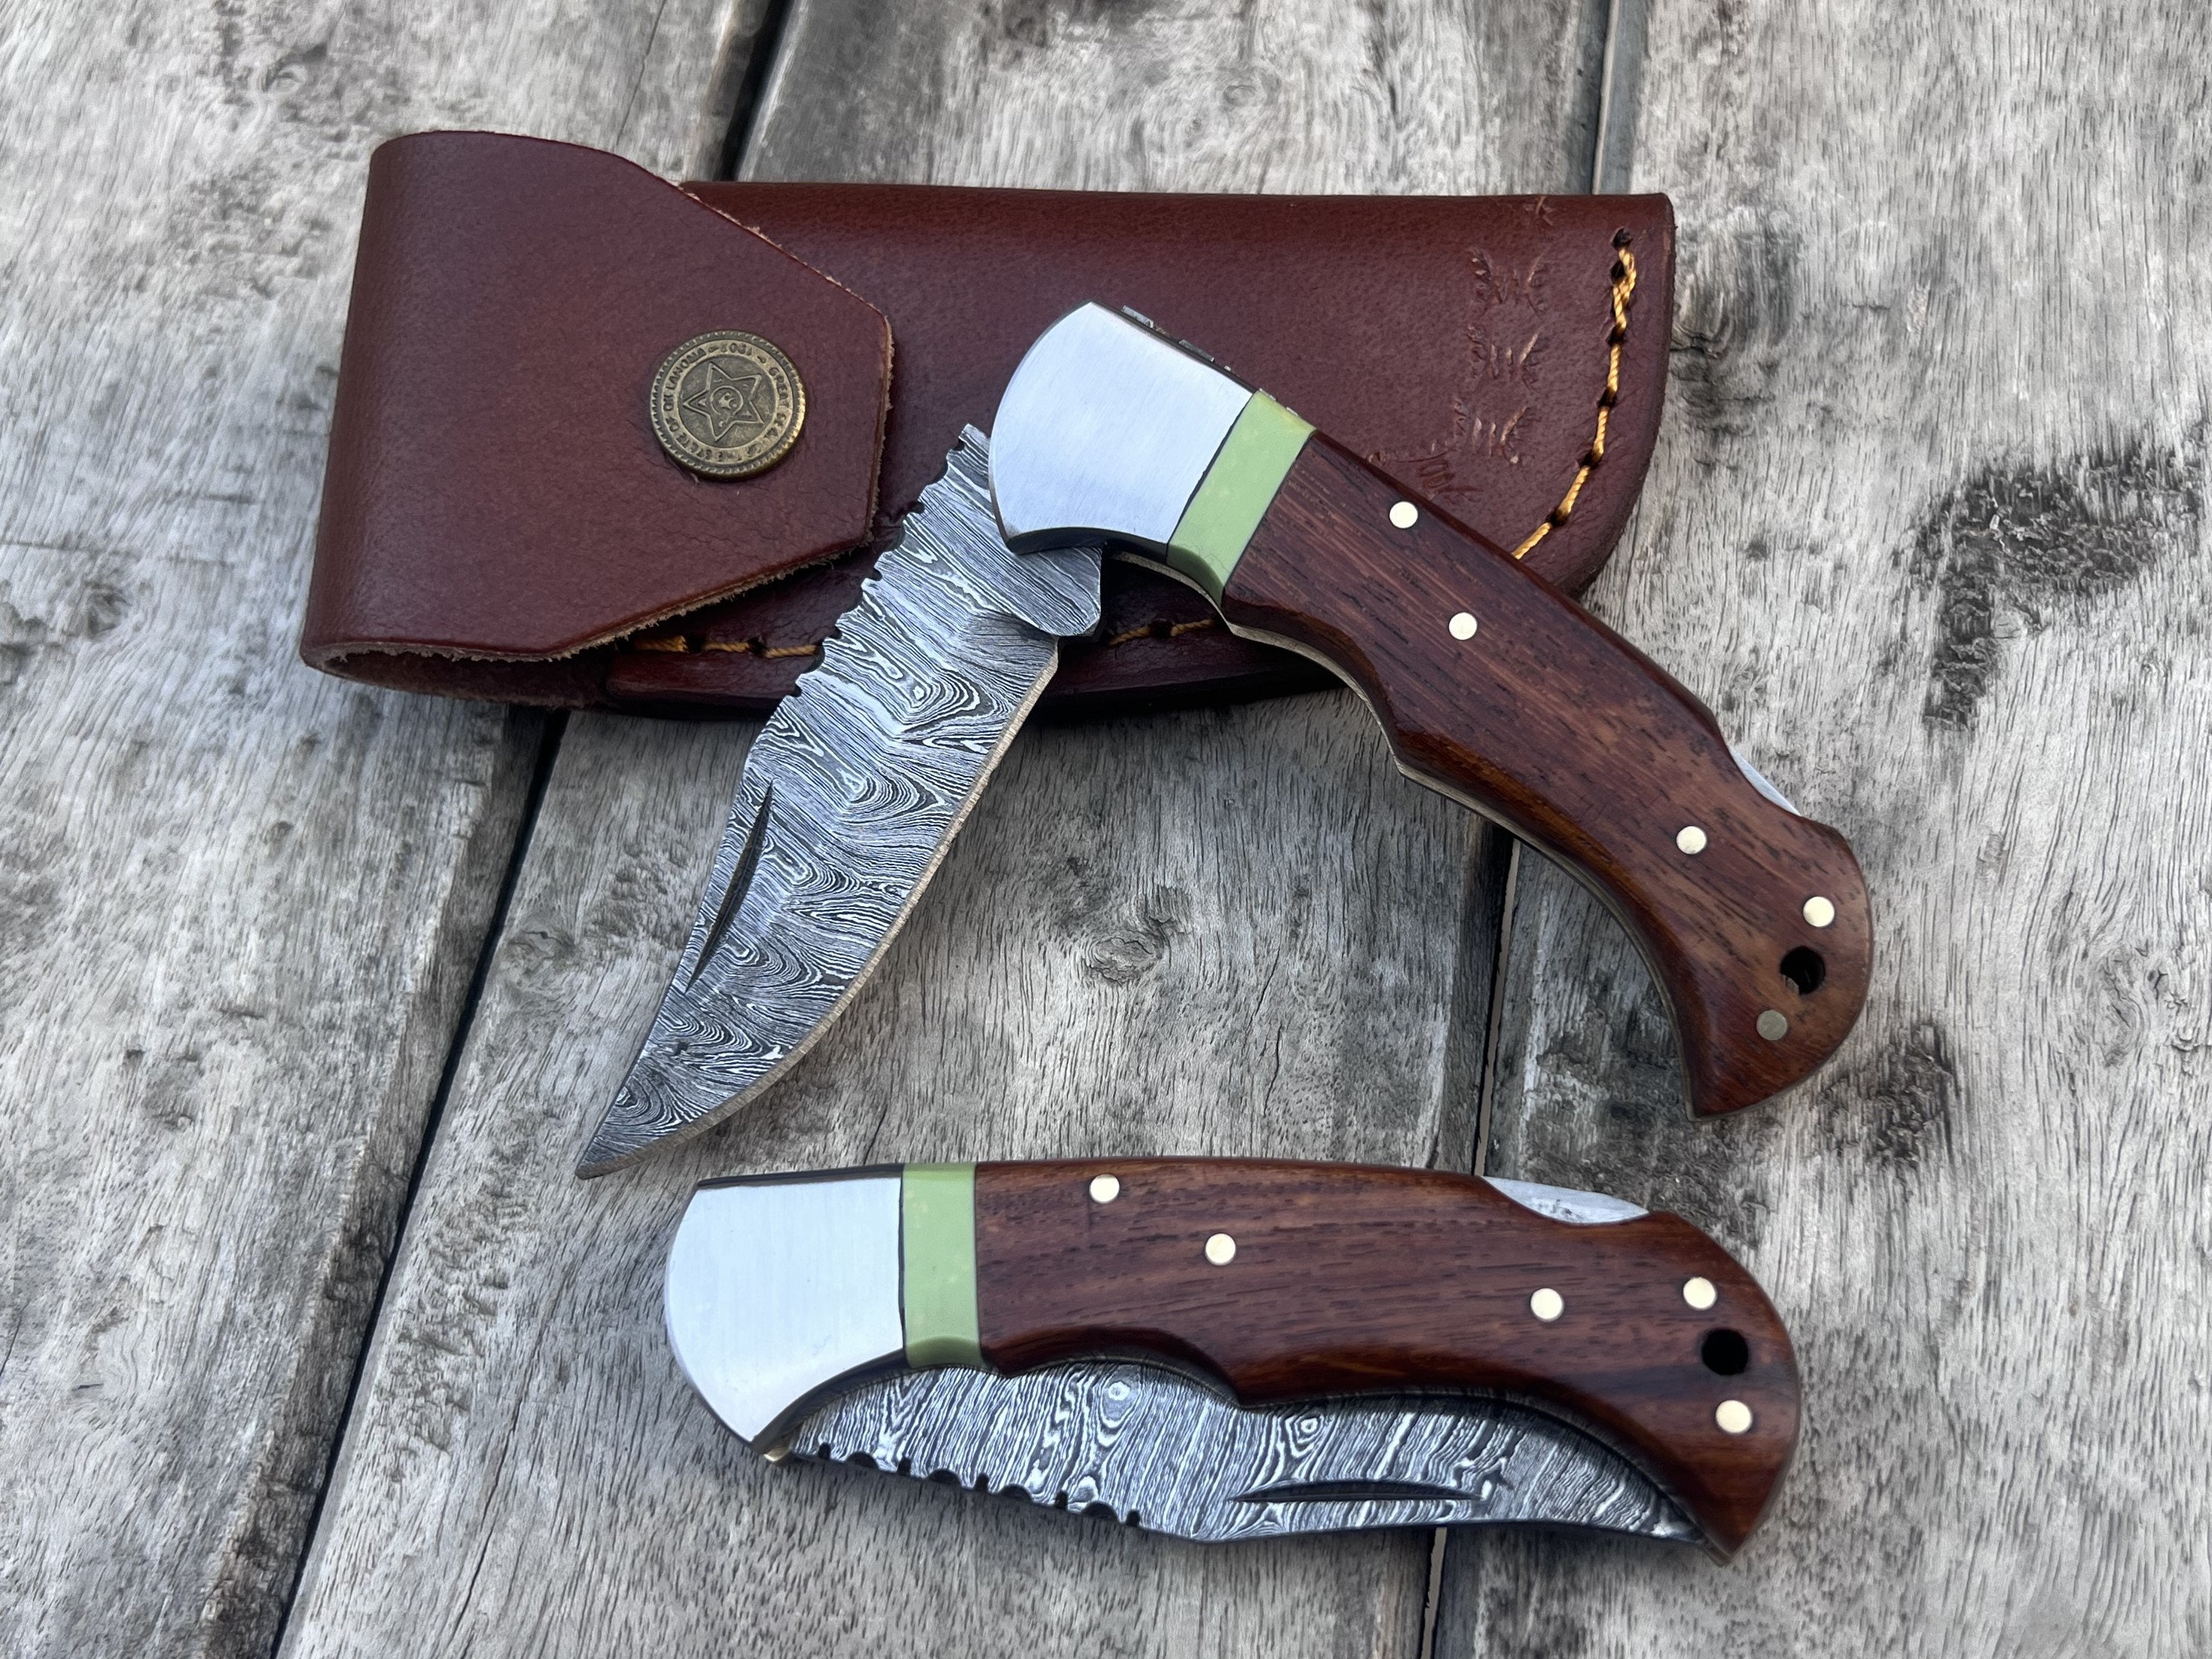 Thomas Damascus Knife Pocket Knife Handle Material: Rosewood Pure Handmade  Outdoor Camping Knives Xmas Gift For Man From E5201314, $32.49